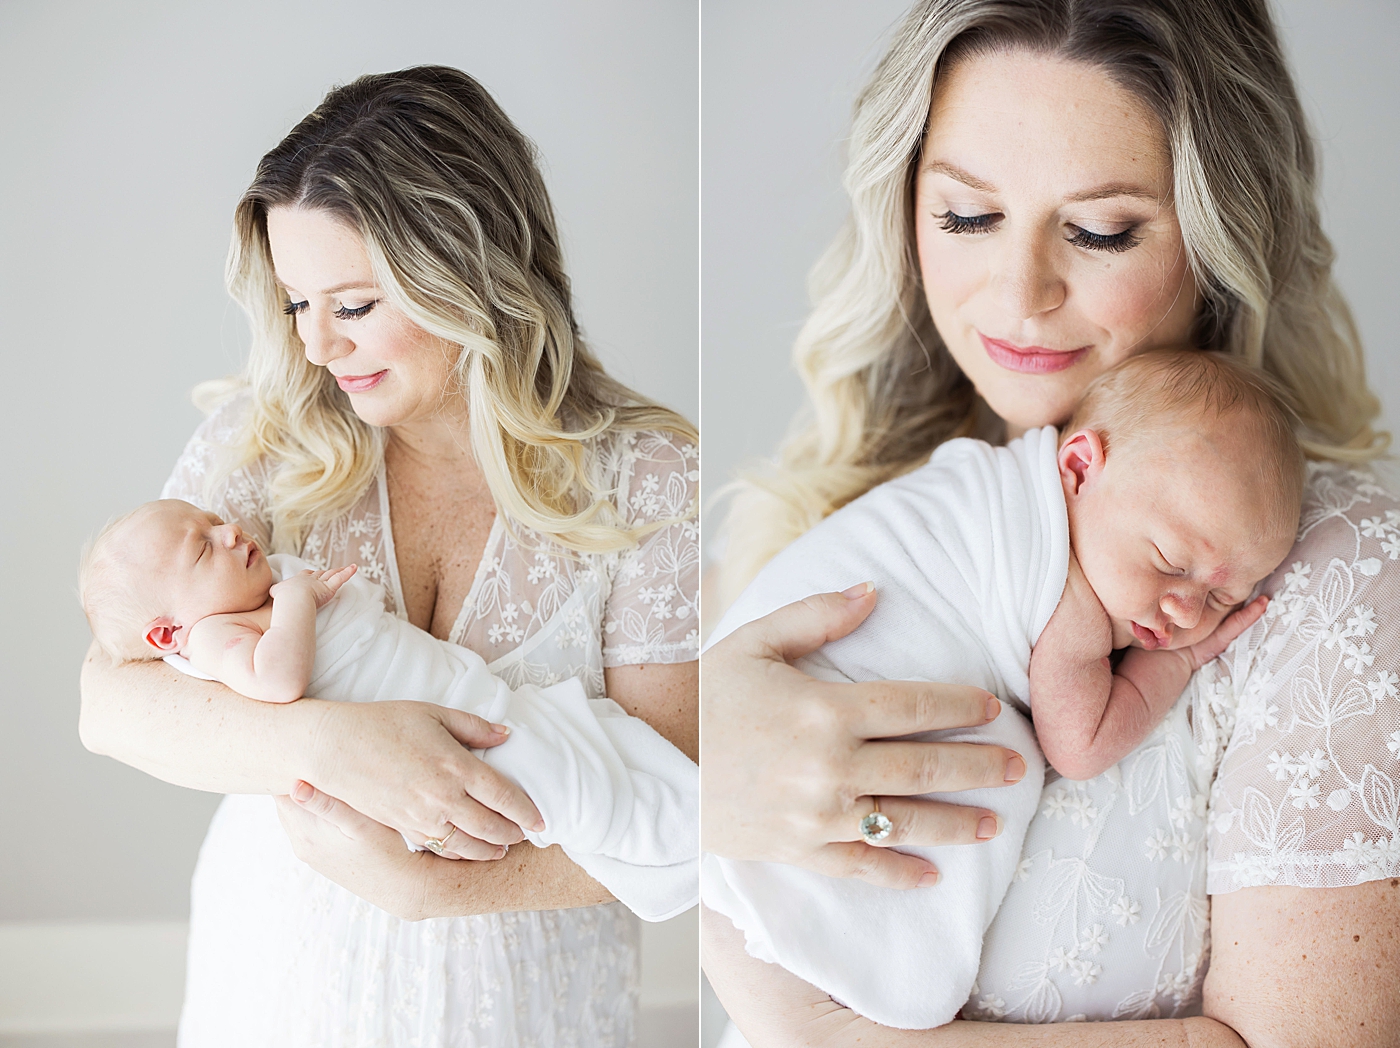 Mom and her baby boy. Photo by Fresh Light Photography.